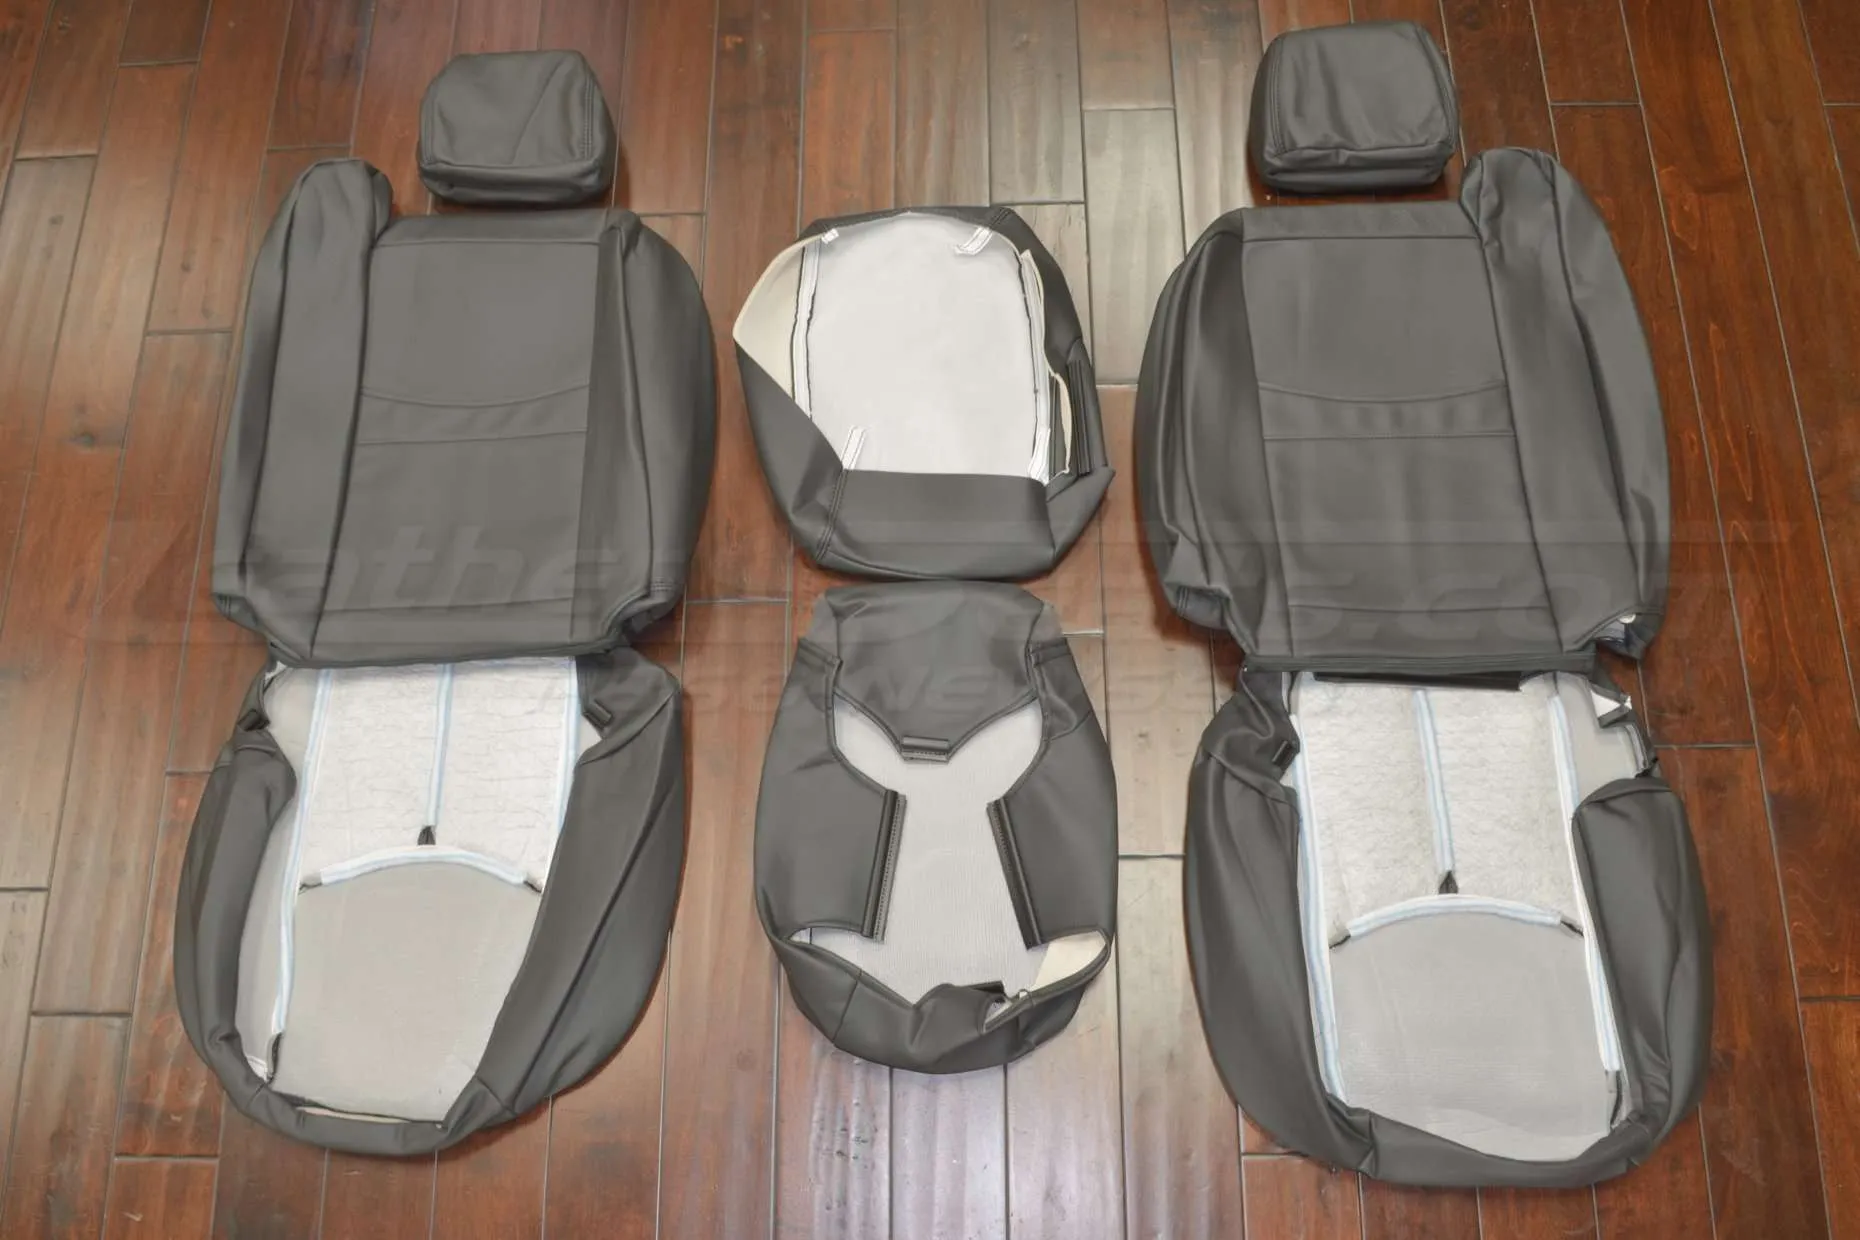 Chevrolet Silverado Upholstery Kit - Graphite - Back view of front seats